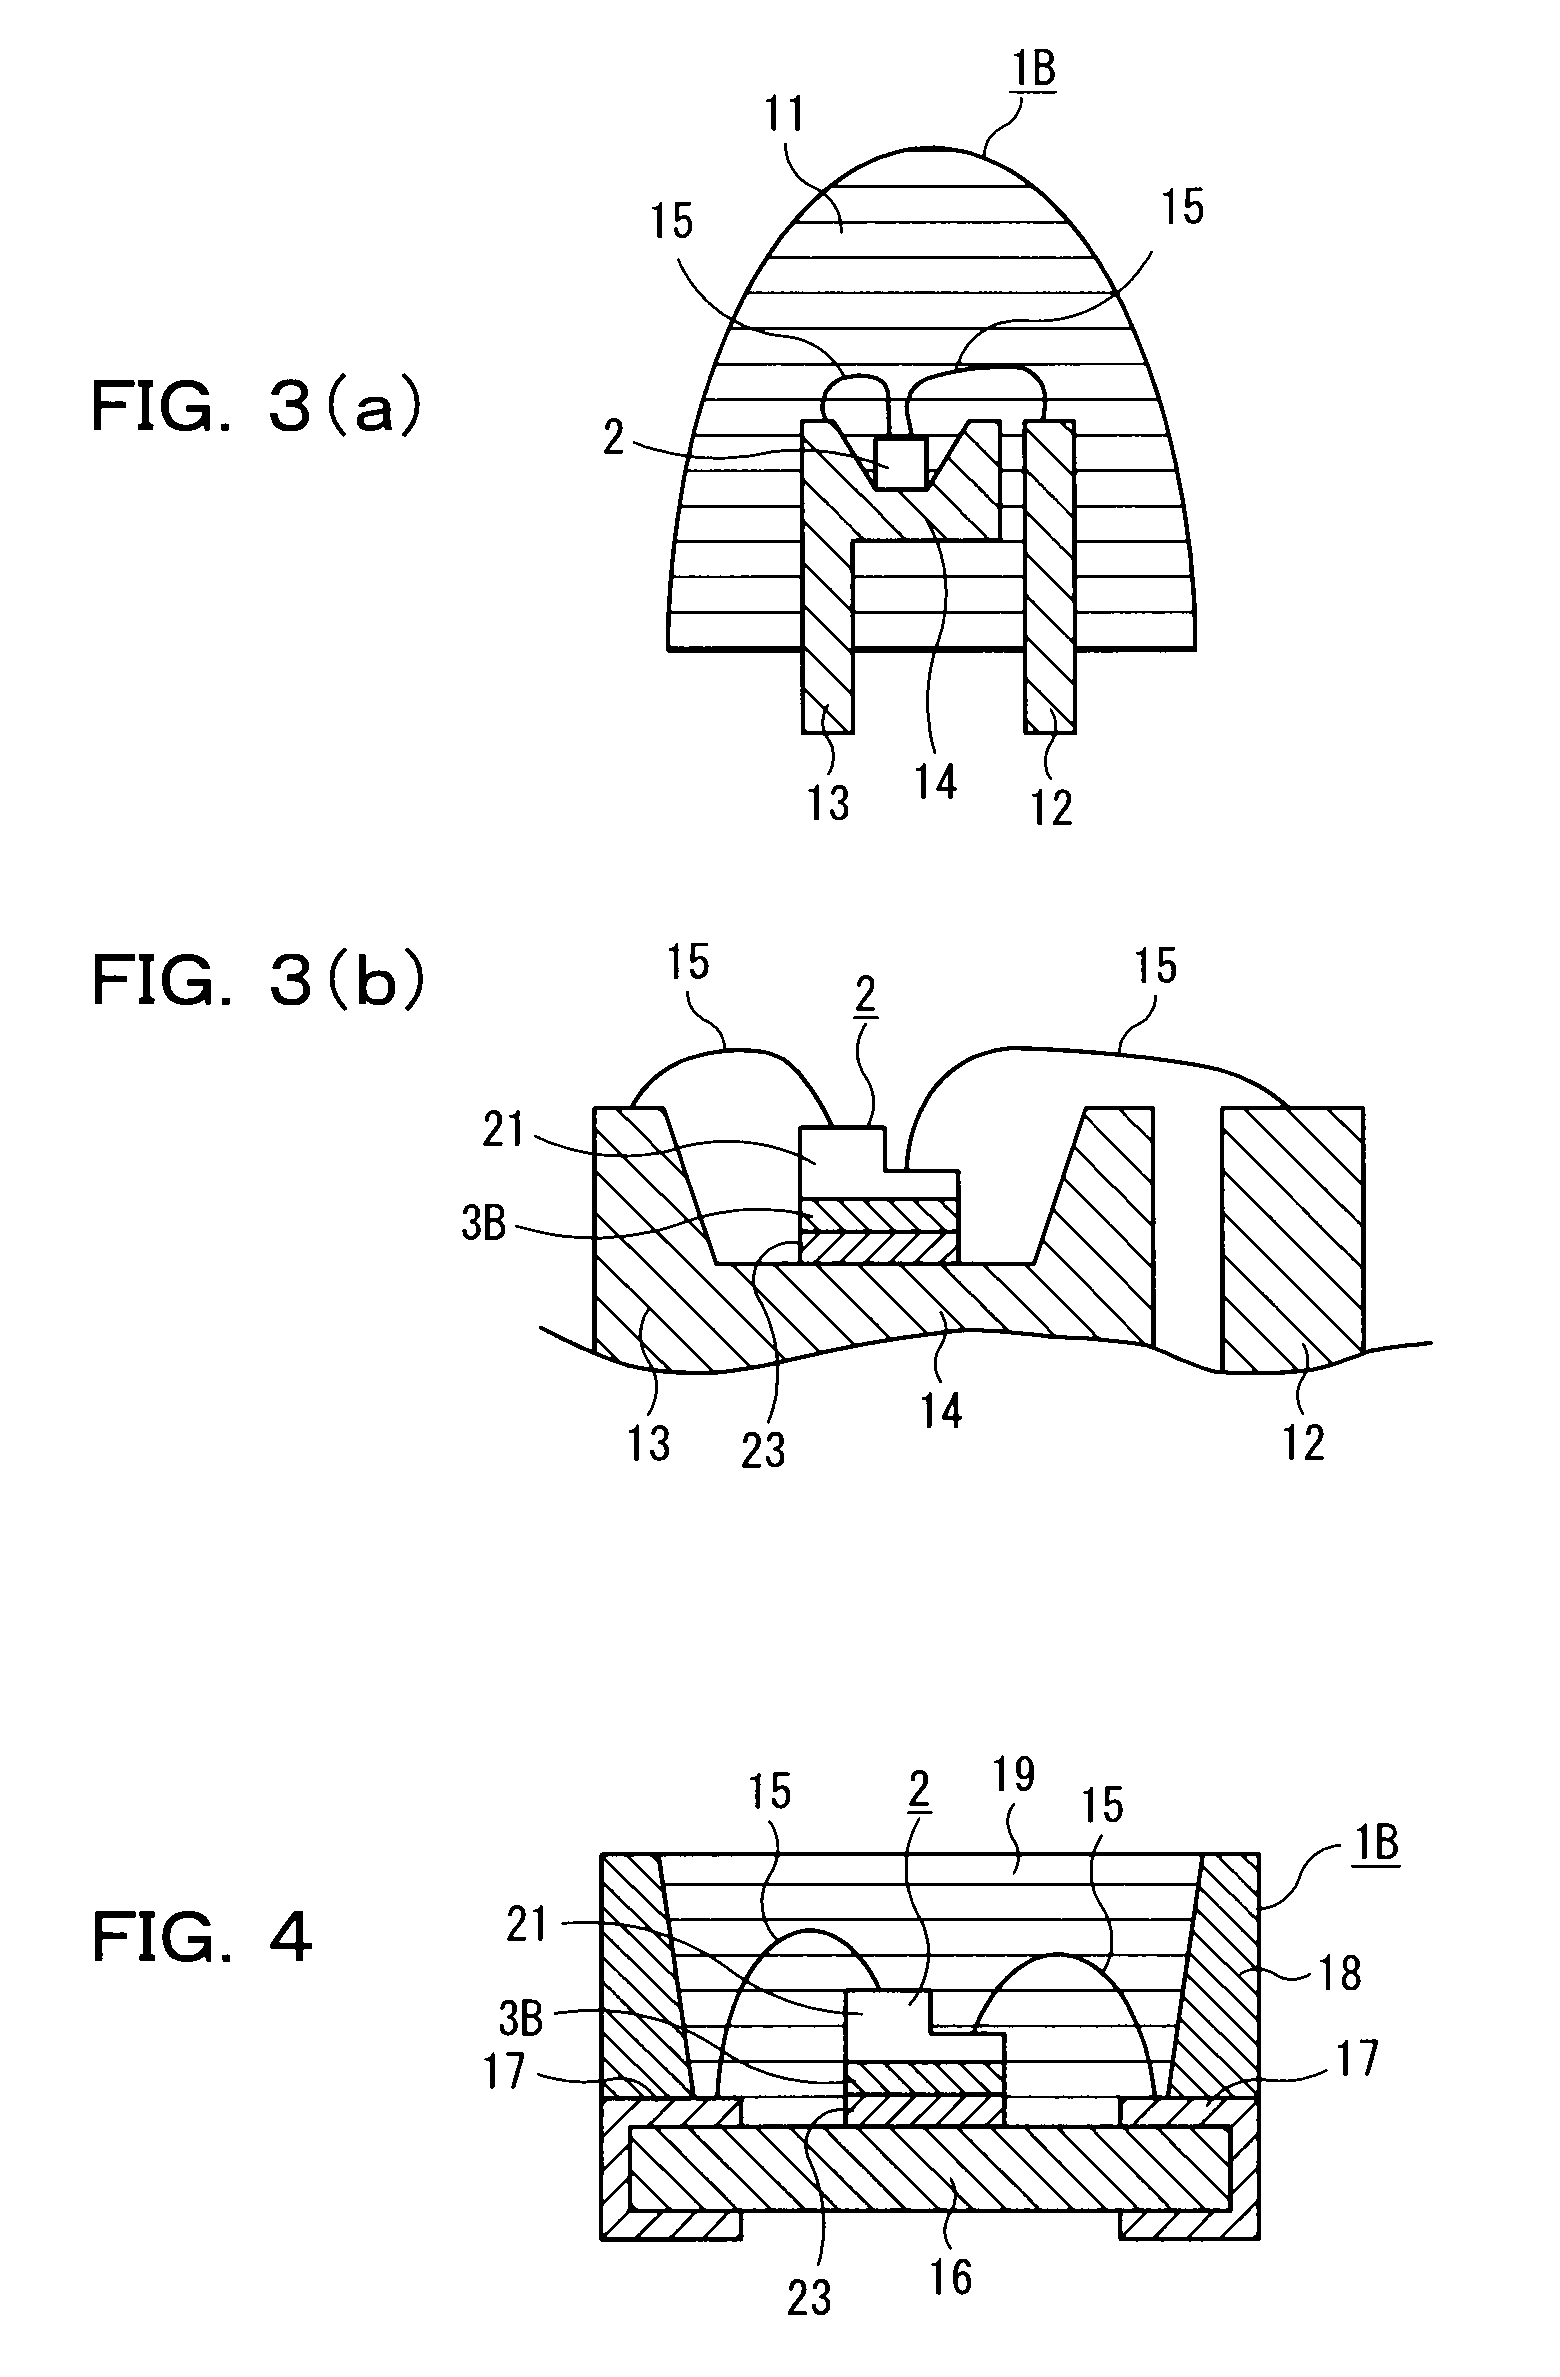 Member for semiconductor light emitting device and method for manufacturing such member, and semiconductor light emitting device using such member